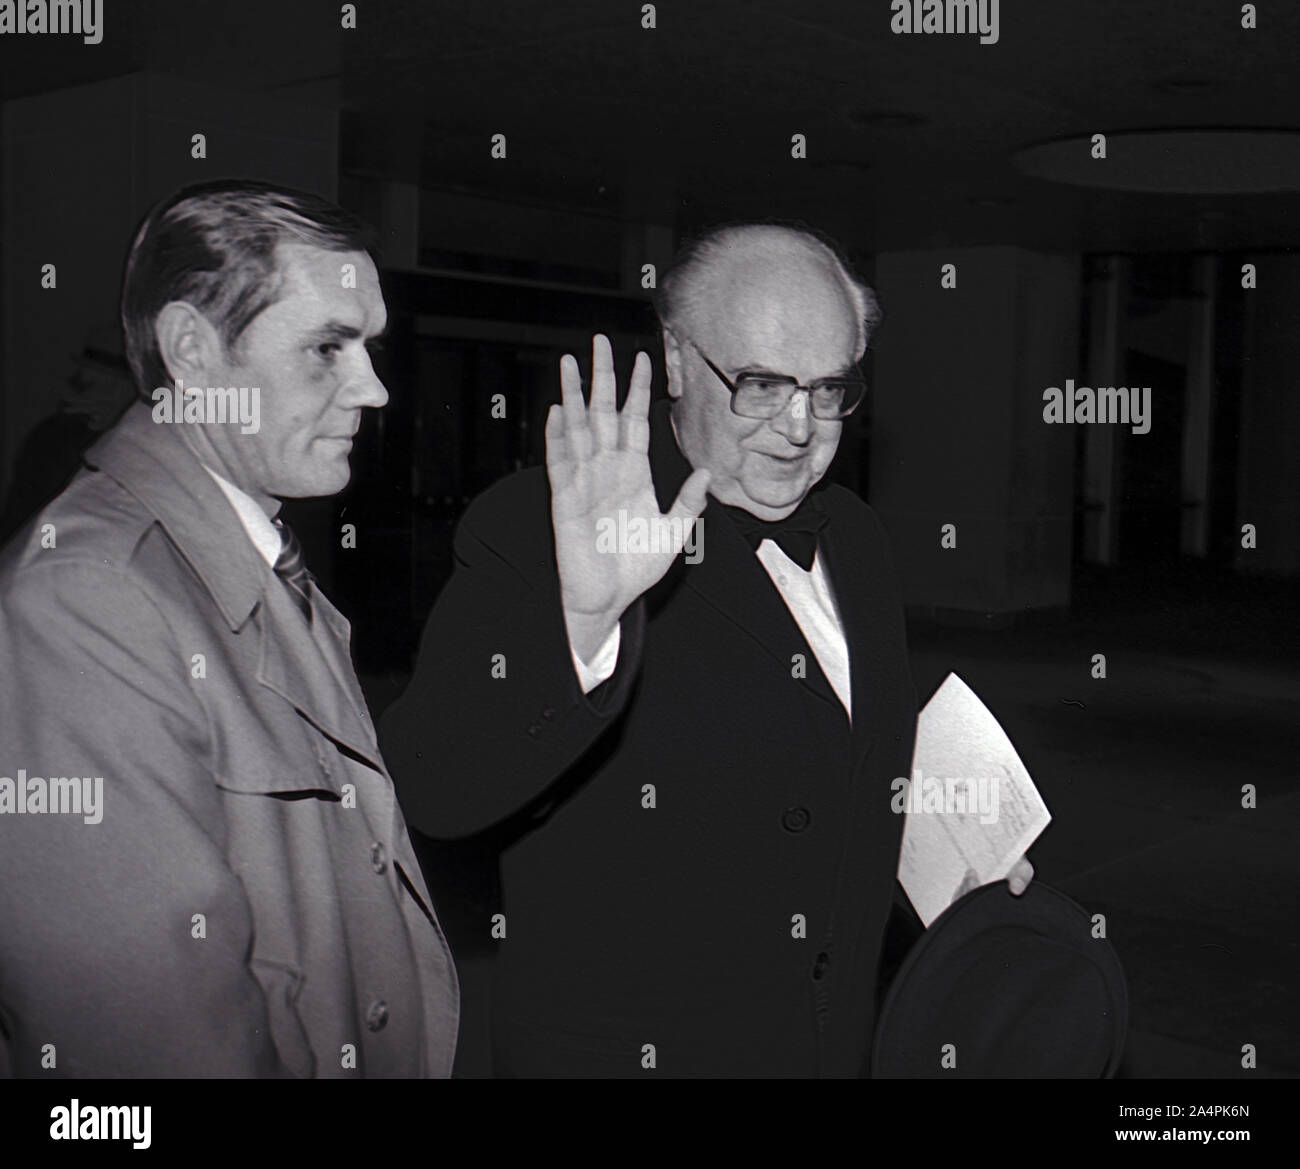 Washington DC, USA, December 3, 1983 Soviet Ambassador the United States Anatoly Dobrynin accompanied by his KGB security escort waves at the camera as he leaves the evening reception at the United States State Department for the Kennedy Center Honors Stock Photo